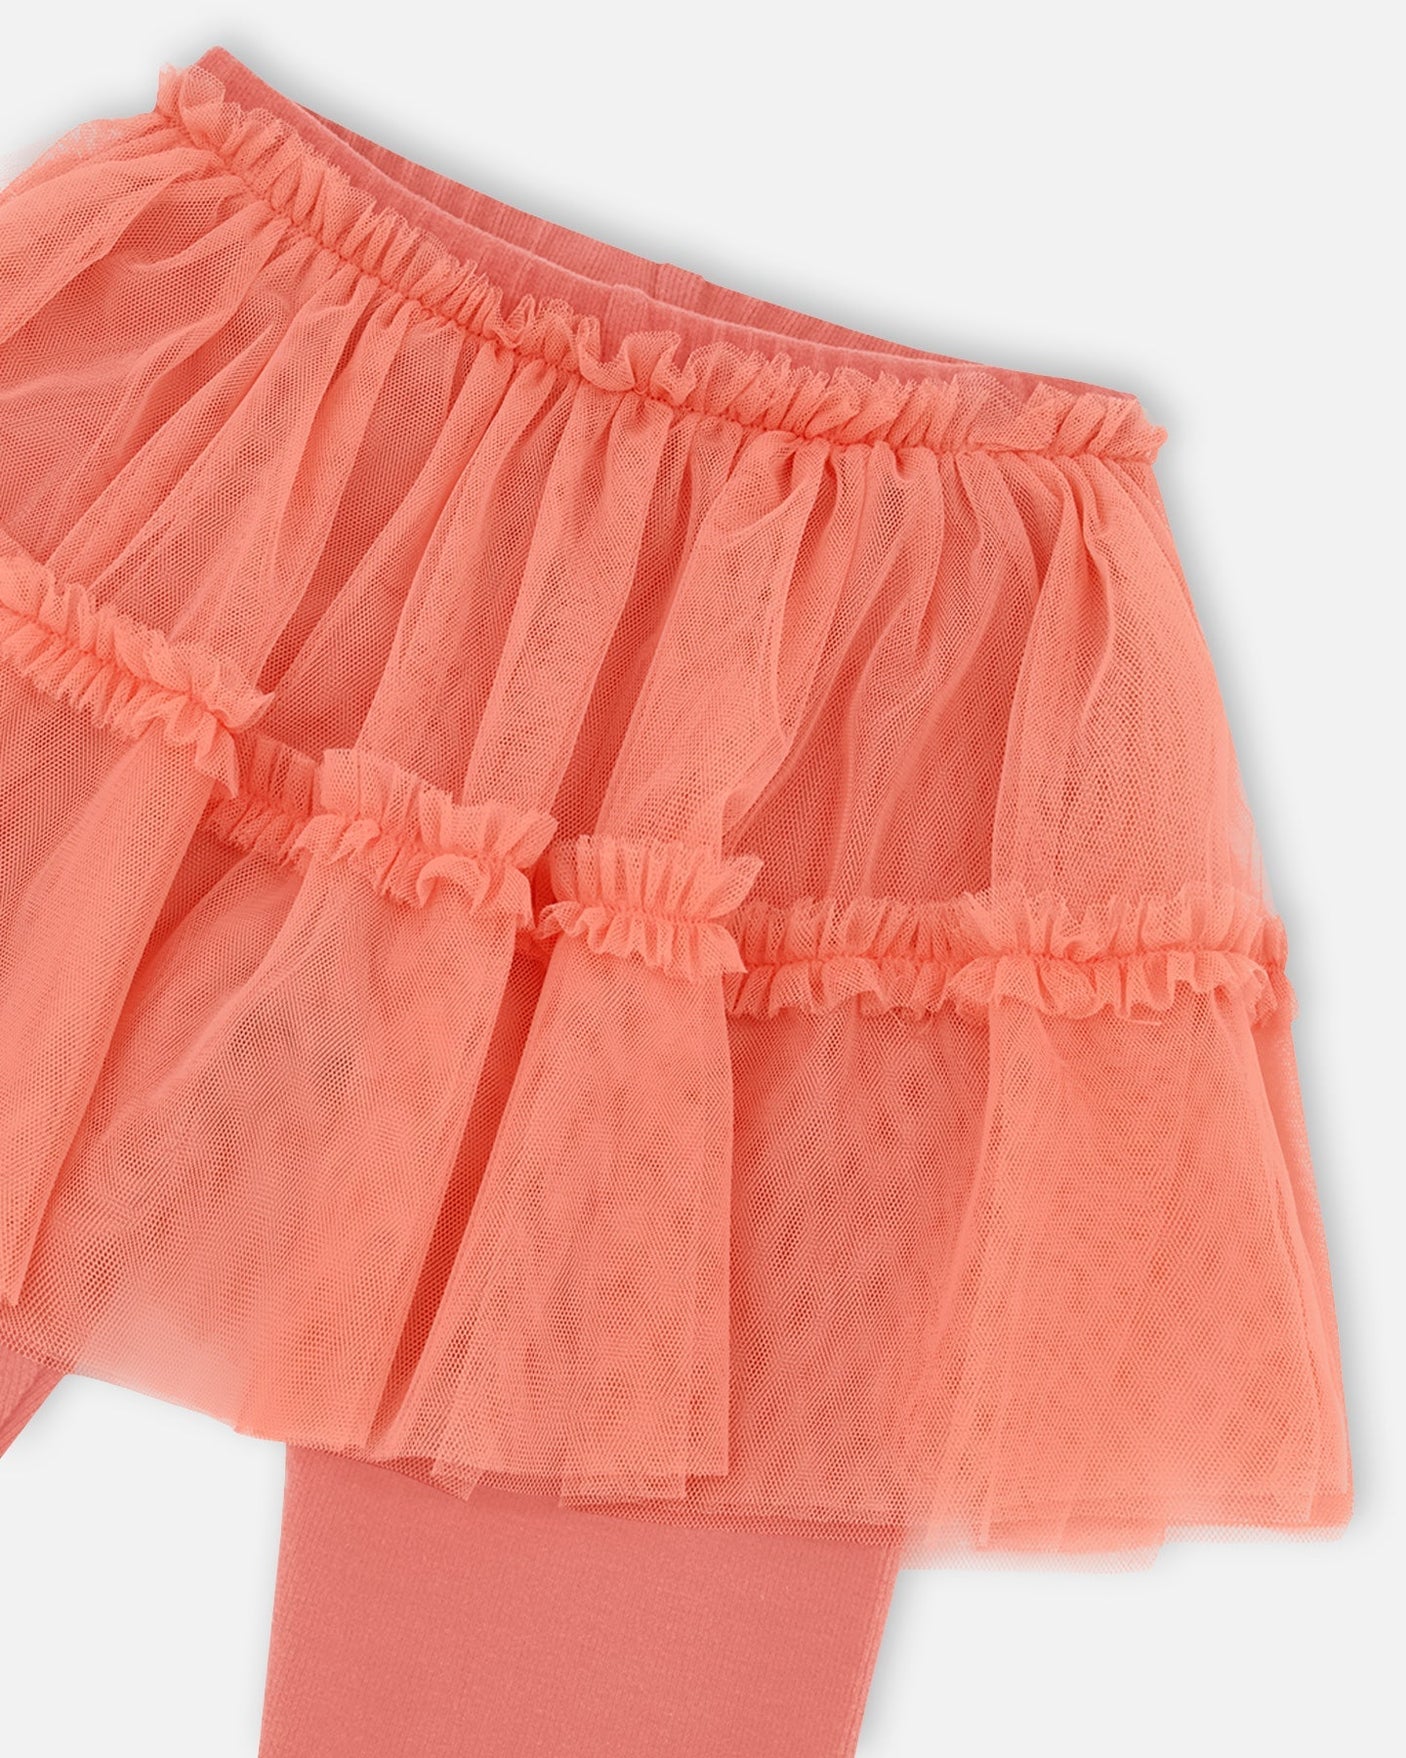 Super Soft Leggings With Tulle Skirt Salmon Pink-3